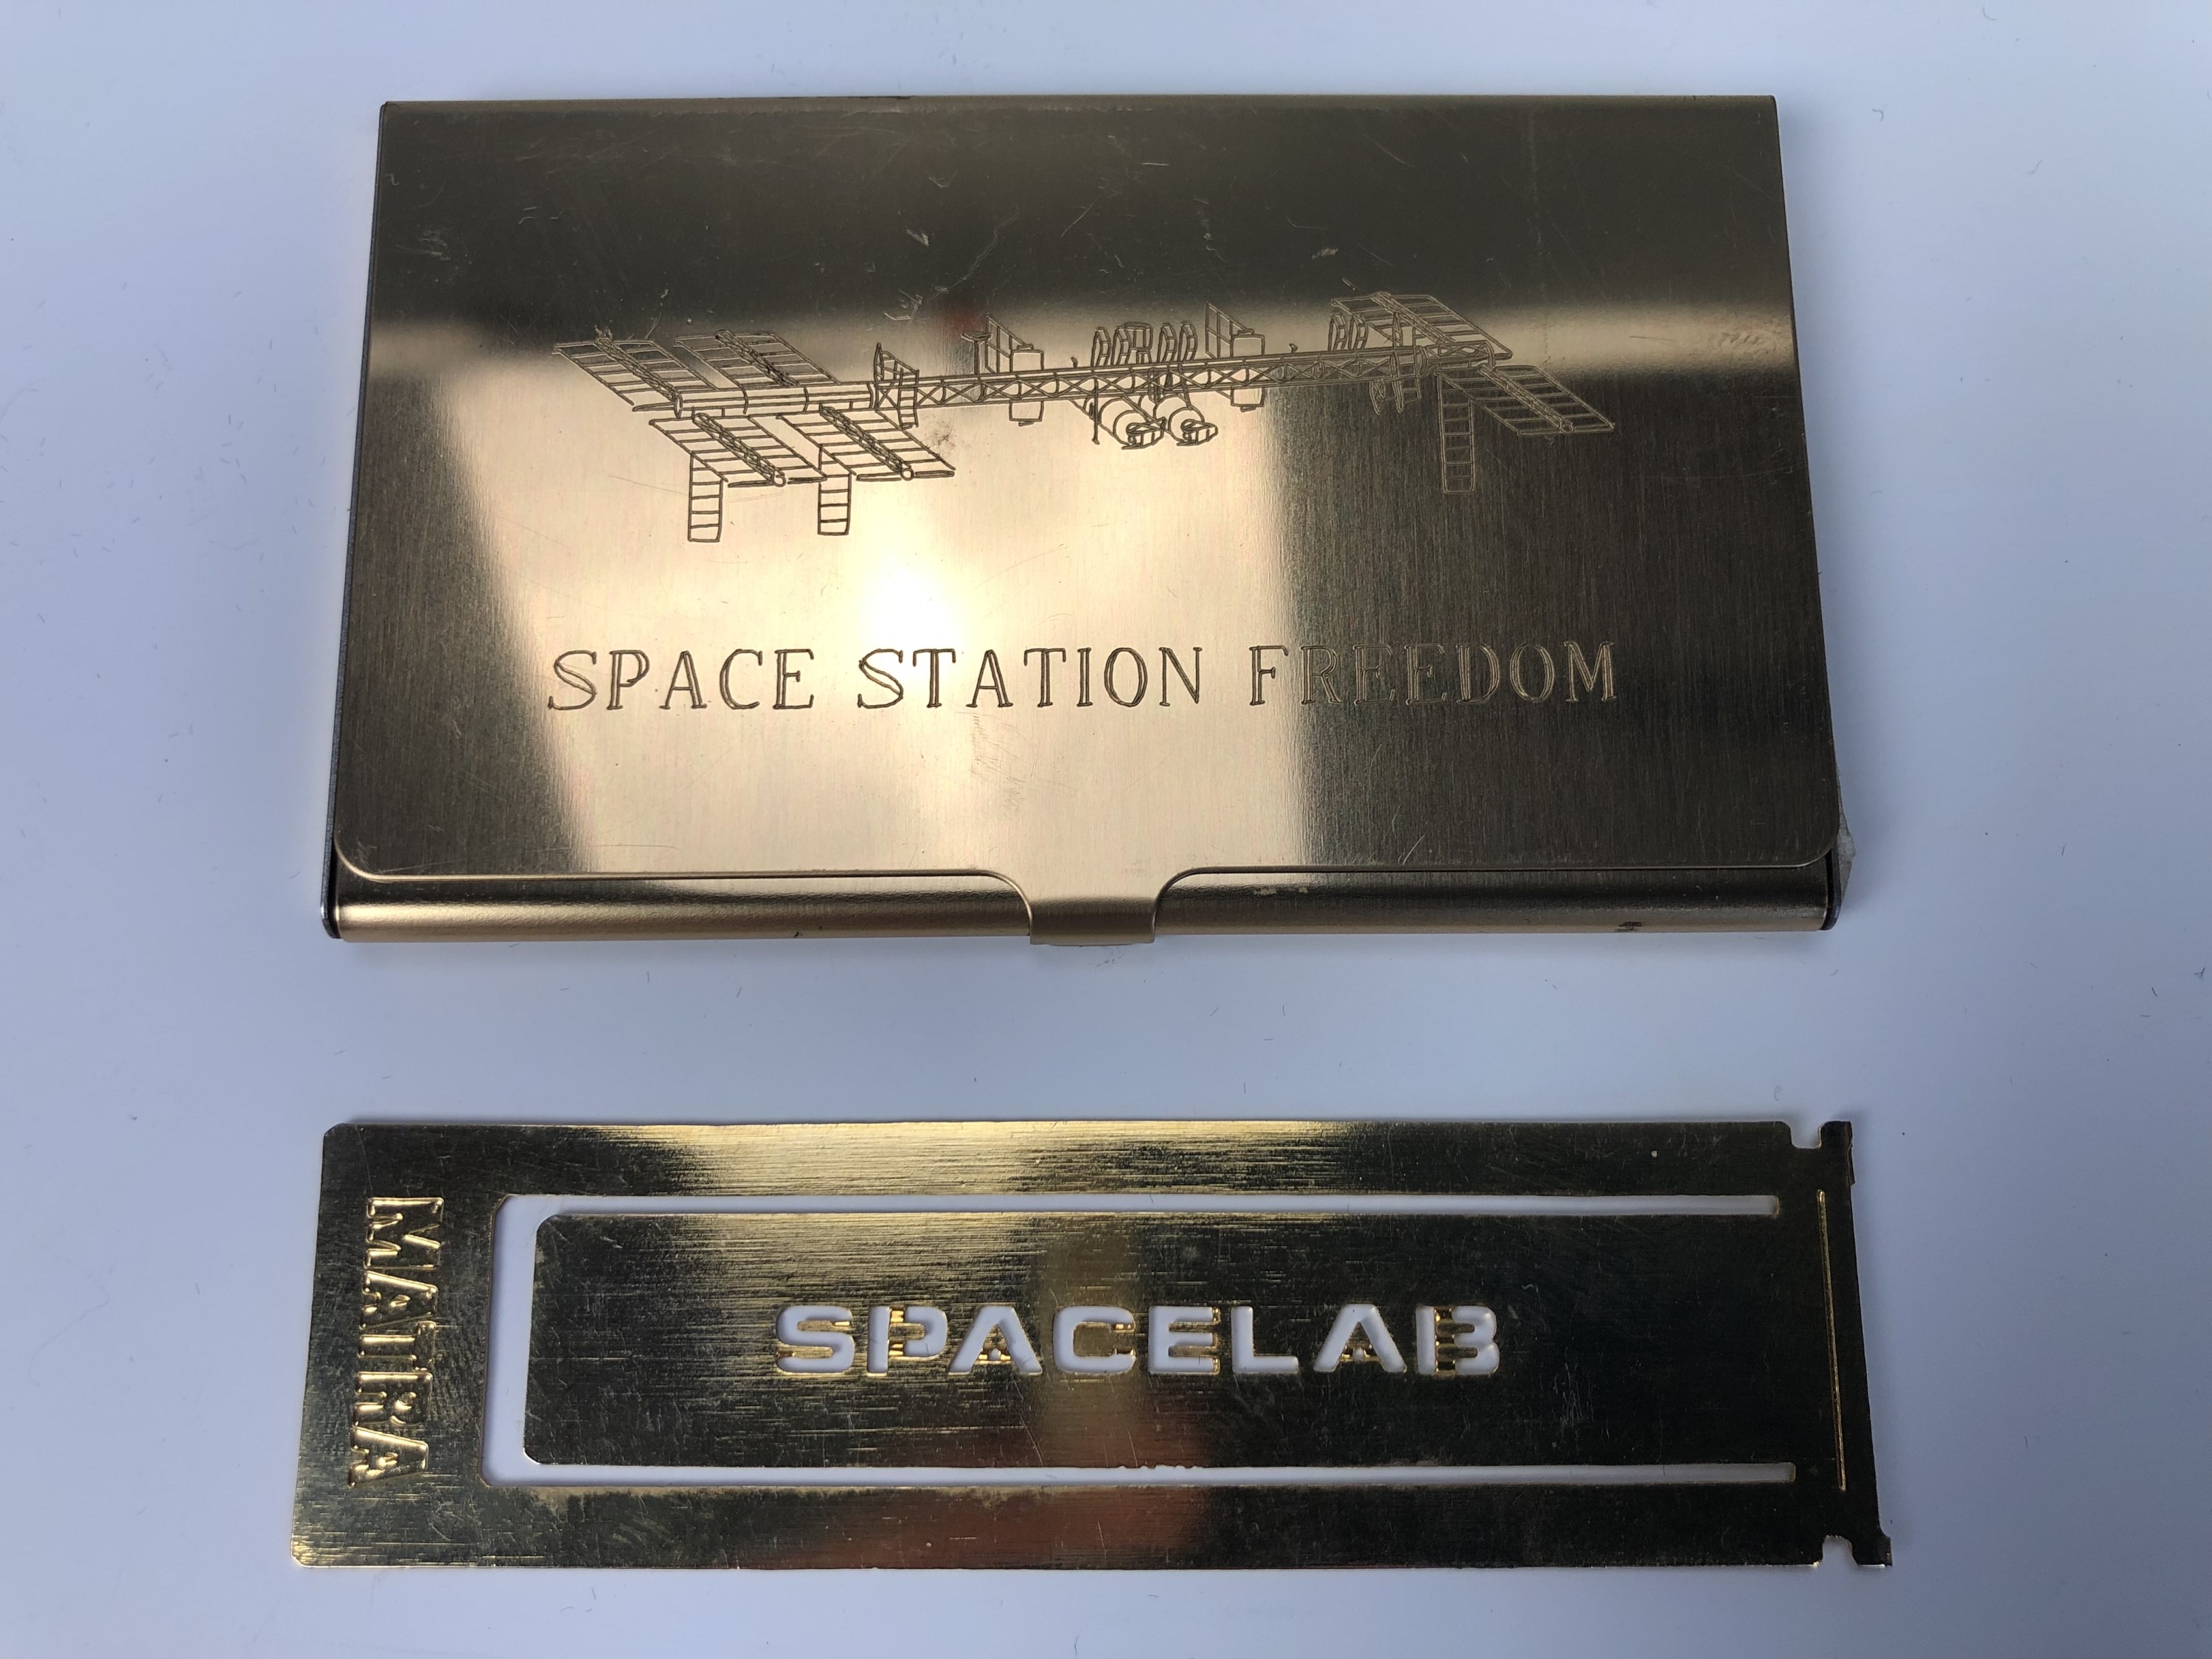 A Spacelab paper clip together with a Space Station Freedom business card case